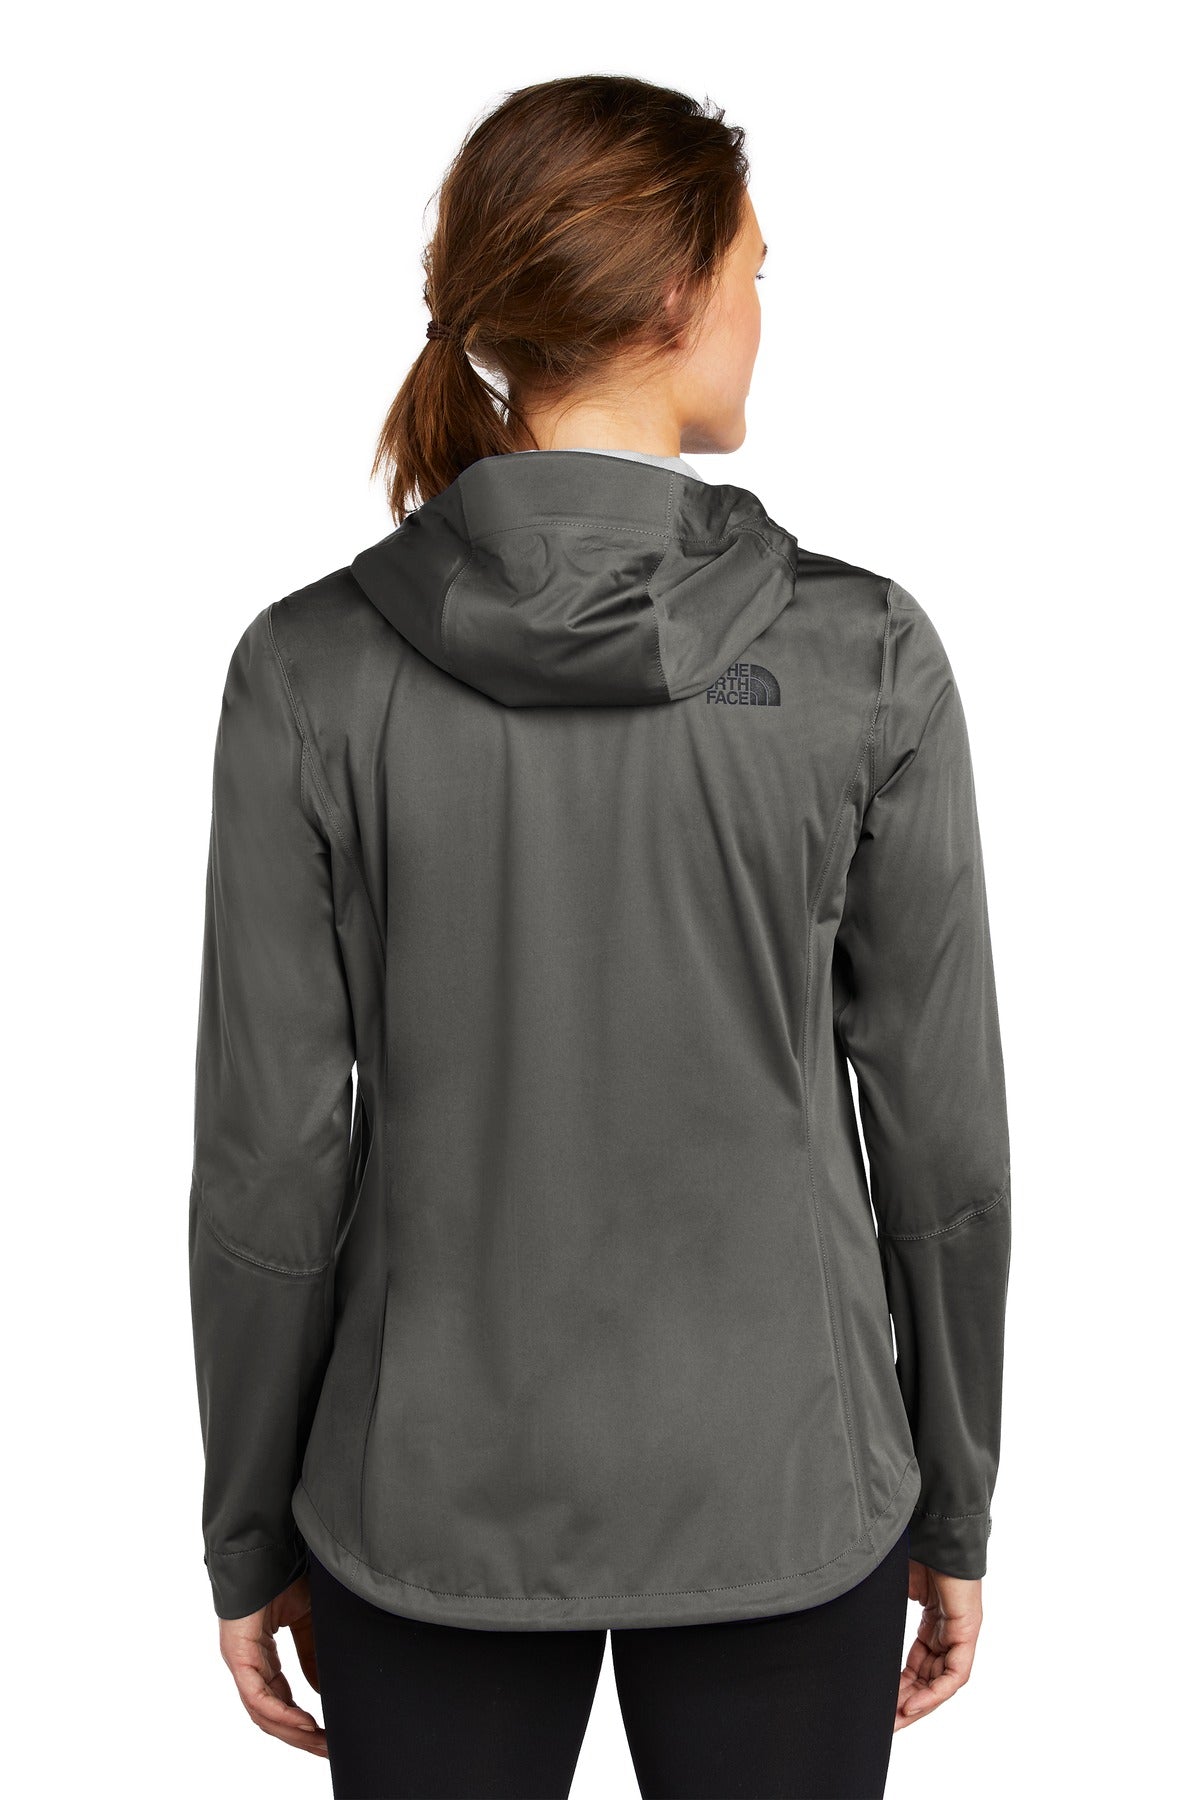 The North Face ® Ladies All-Weather DryVent ™ Stretch Jacket NF0A47FH - DFW Impression